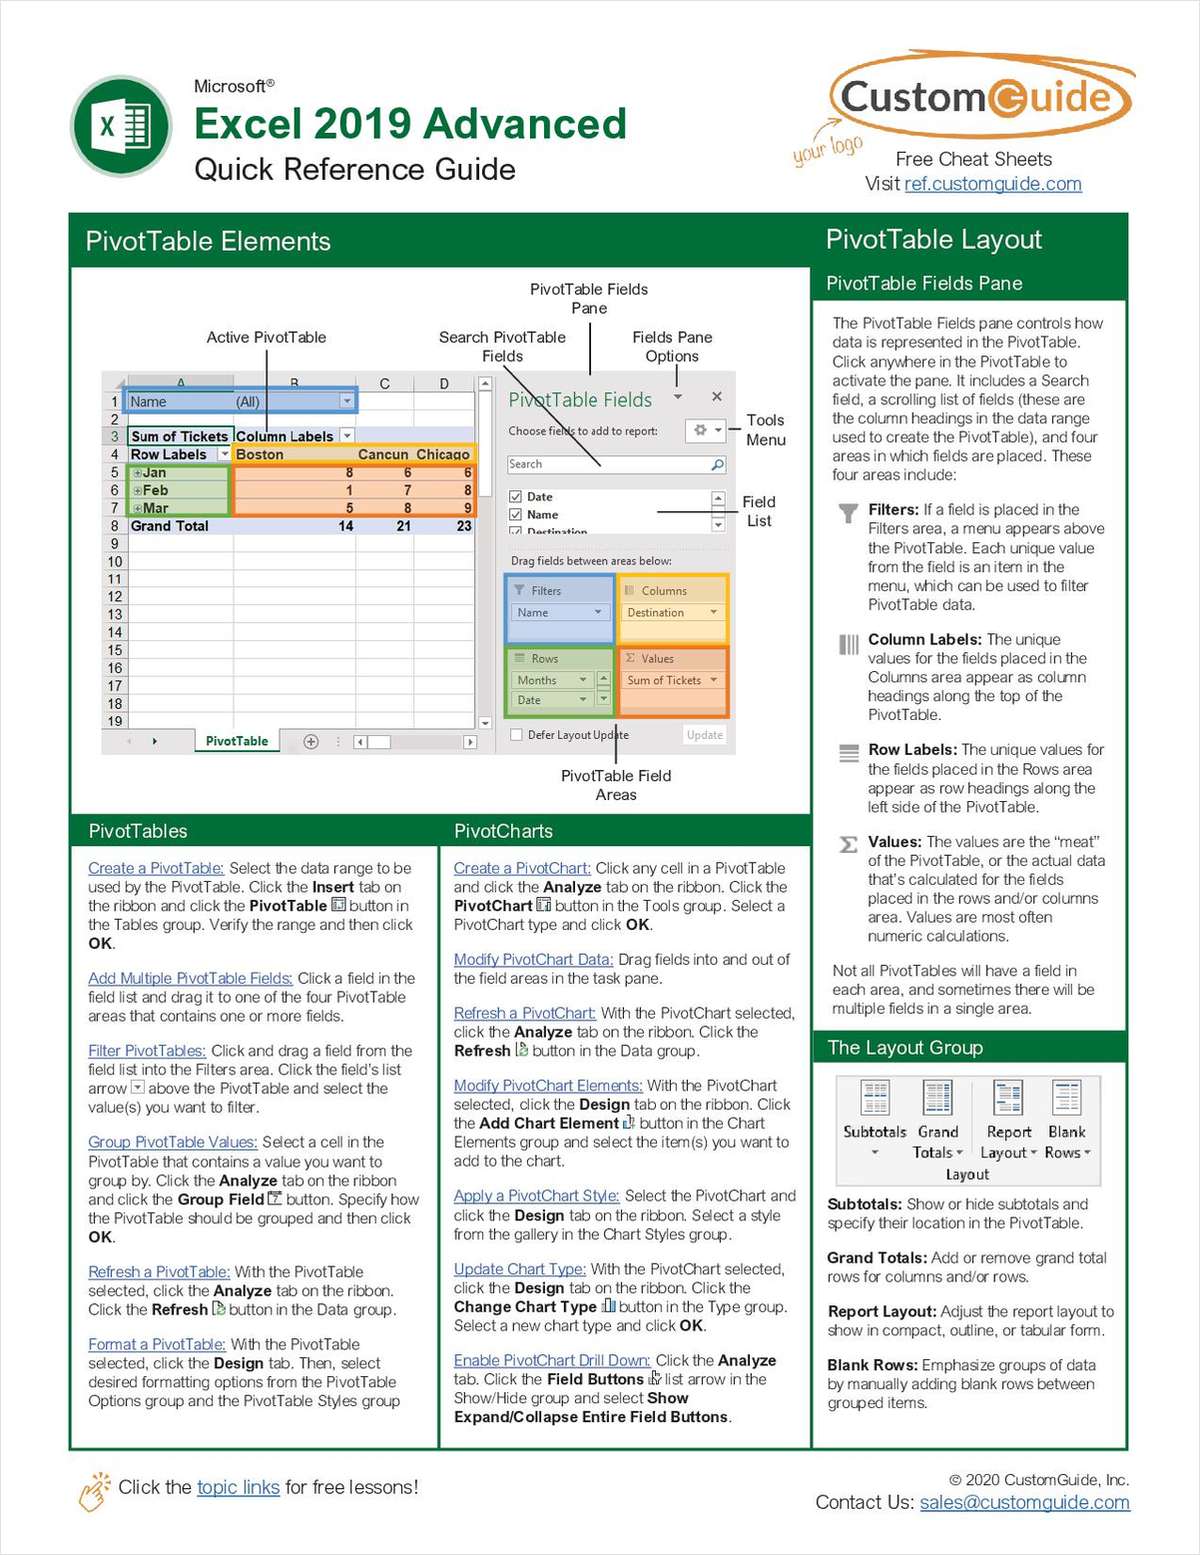 Microsoft Excel 2019 Advanced - Quick Reference Guide